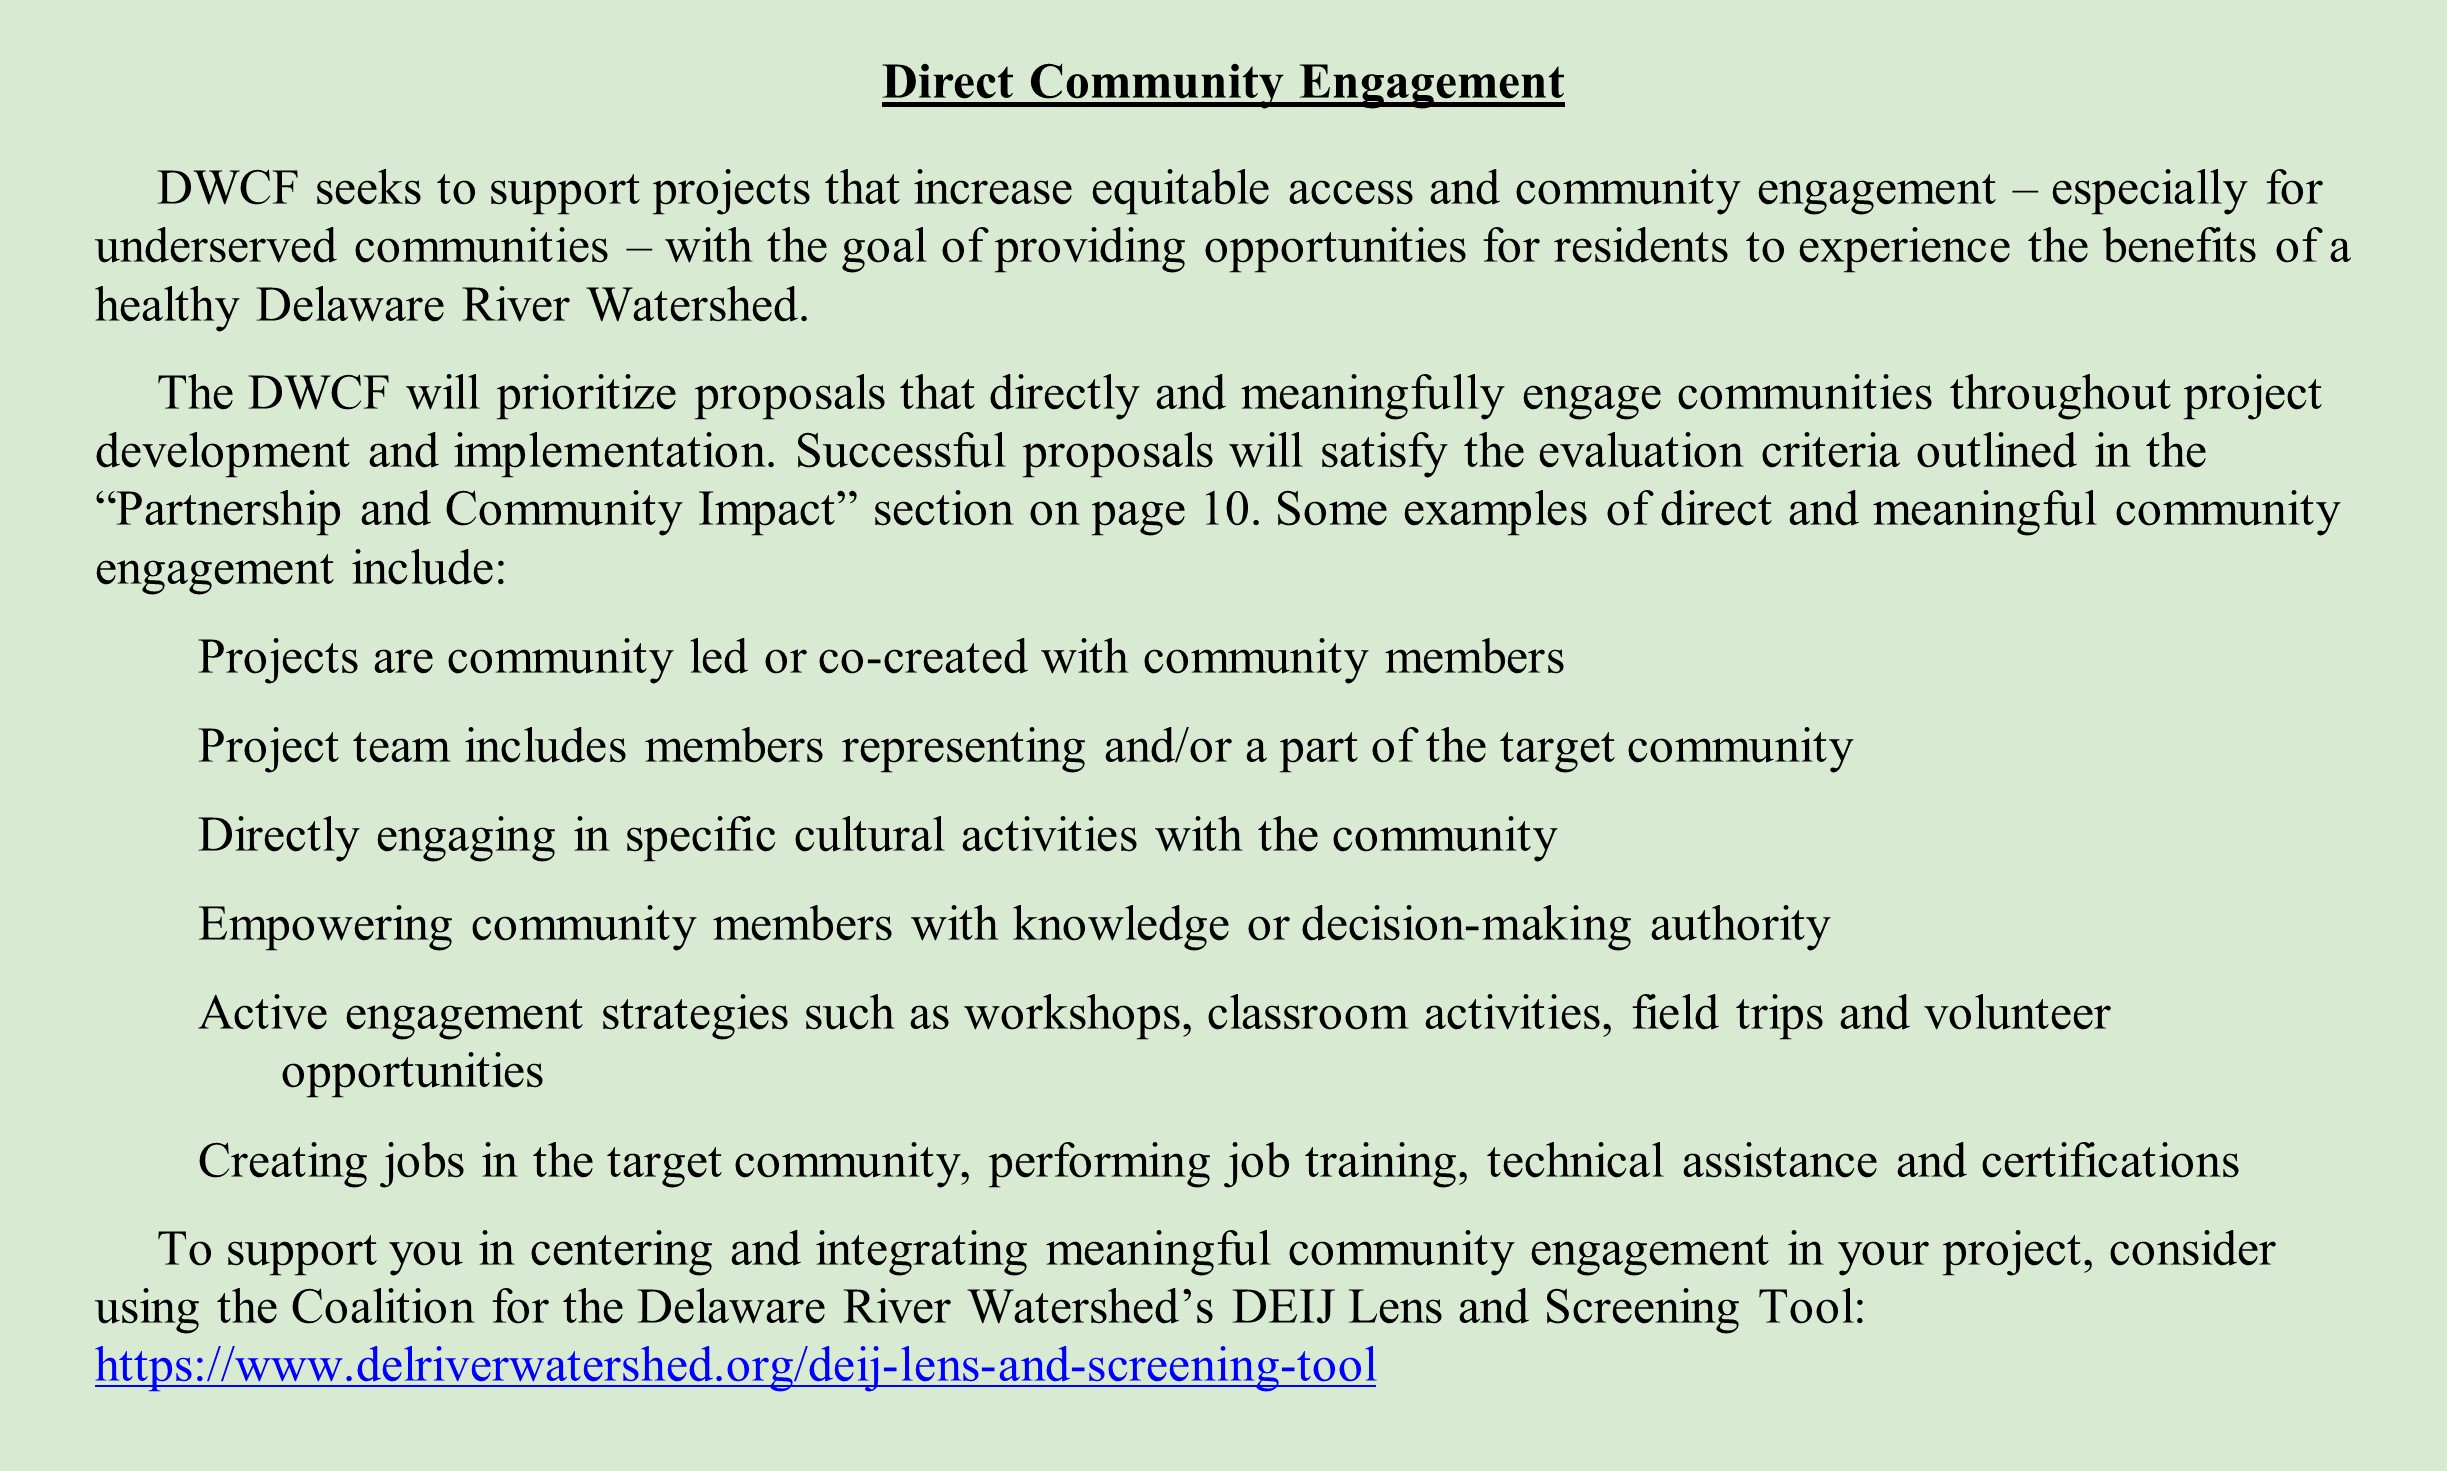 Direct Community Engagement DWCF seeks to support projects that increase equitable access and community engagement – especially for underserved communities – with the goal of providing opportunities for residents to experience the benefits of a healthy Delaware River Watershed. The DWCF will prioritize proposals that directly and meaningfully engage communities throughout project development and implementation. Successful proposals will satisfy the evaluation criteria outlined in the “Partnership and Community Impact” section on page 10. Some examples of direct and meaningful community engagement include: •	Projects are community led or co-created with community members •	Project team includes members representing and/or a part of the target community •	Directly engaging in specific cultural activities with the community •	Empowering community members with knowledge or decision-making authority •	Active engagement strategies such as workshops, classroom activities, field trips and volunteer opportunities •	Creating jobs in the target community, performing job training, technical assistance and certifications To support you in centering and integrating meaningful community engagement in your project, consider using the Coalition for the Delaware River Watershed’s DEIJ Lens and Screening Tool: https://www.delriverwatershed.org/deij-lens-and-screening-tool Priority will be given to projects that were developed through community input and co-design processes.